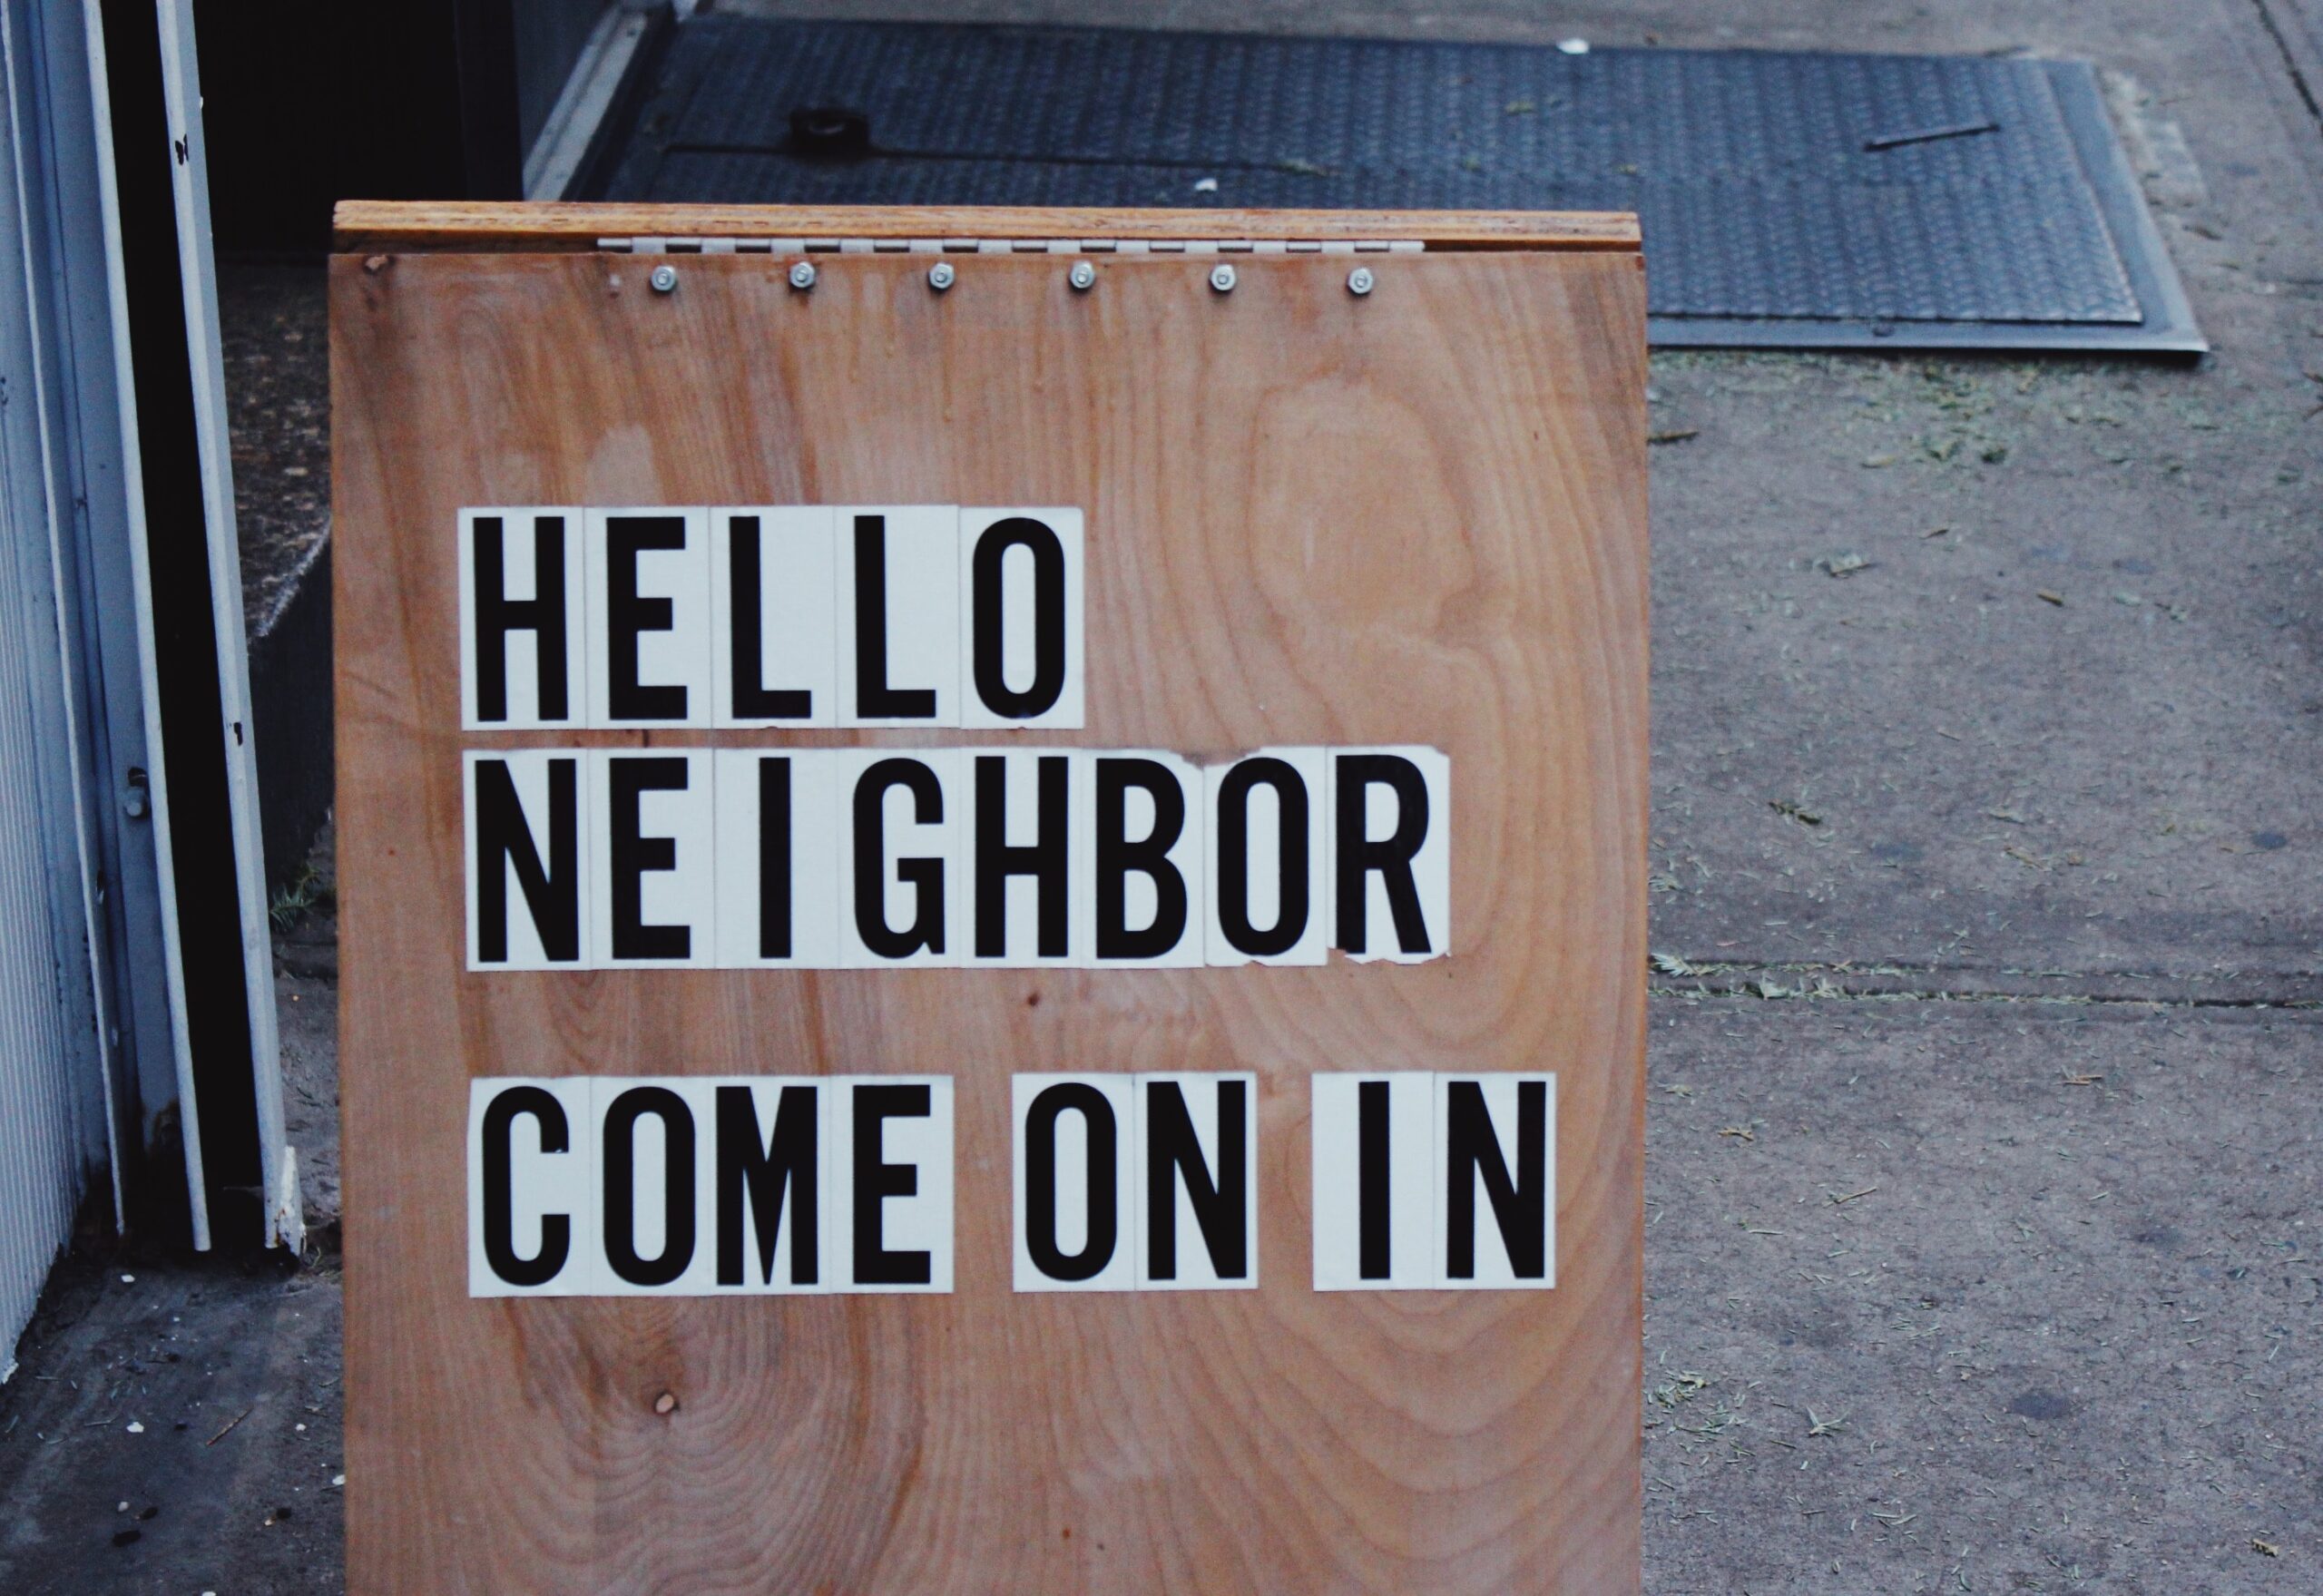 Board that says "Hello Neighbor Come on In"